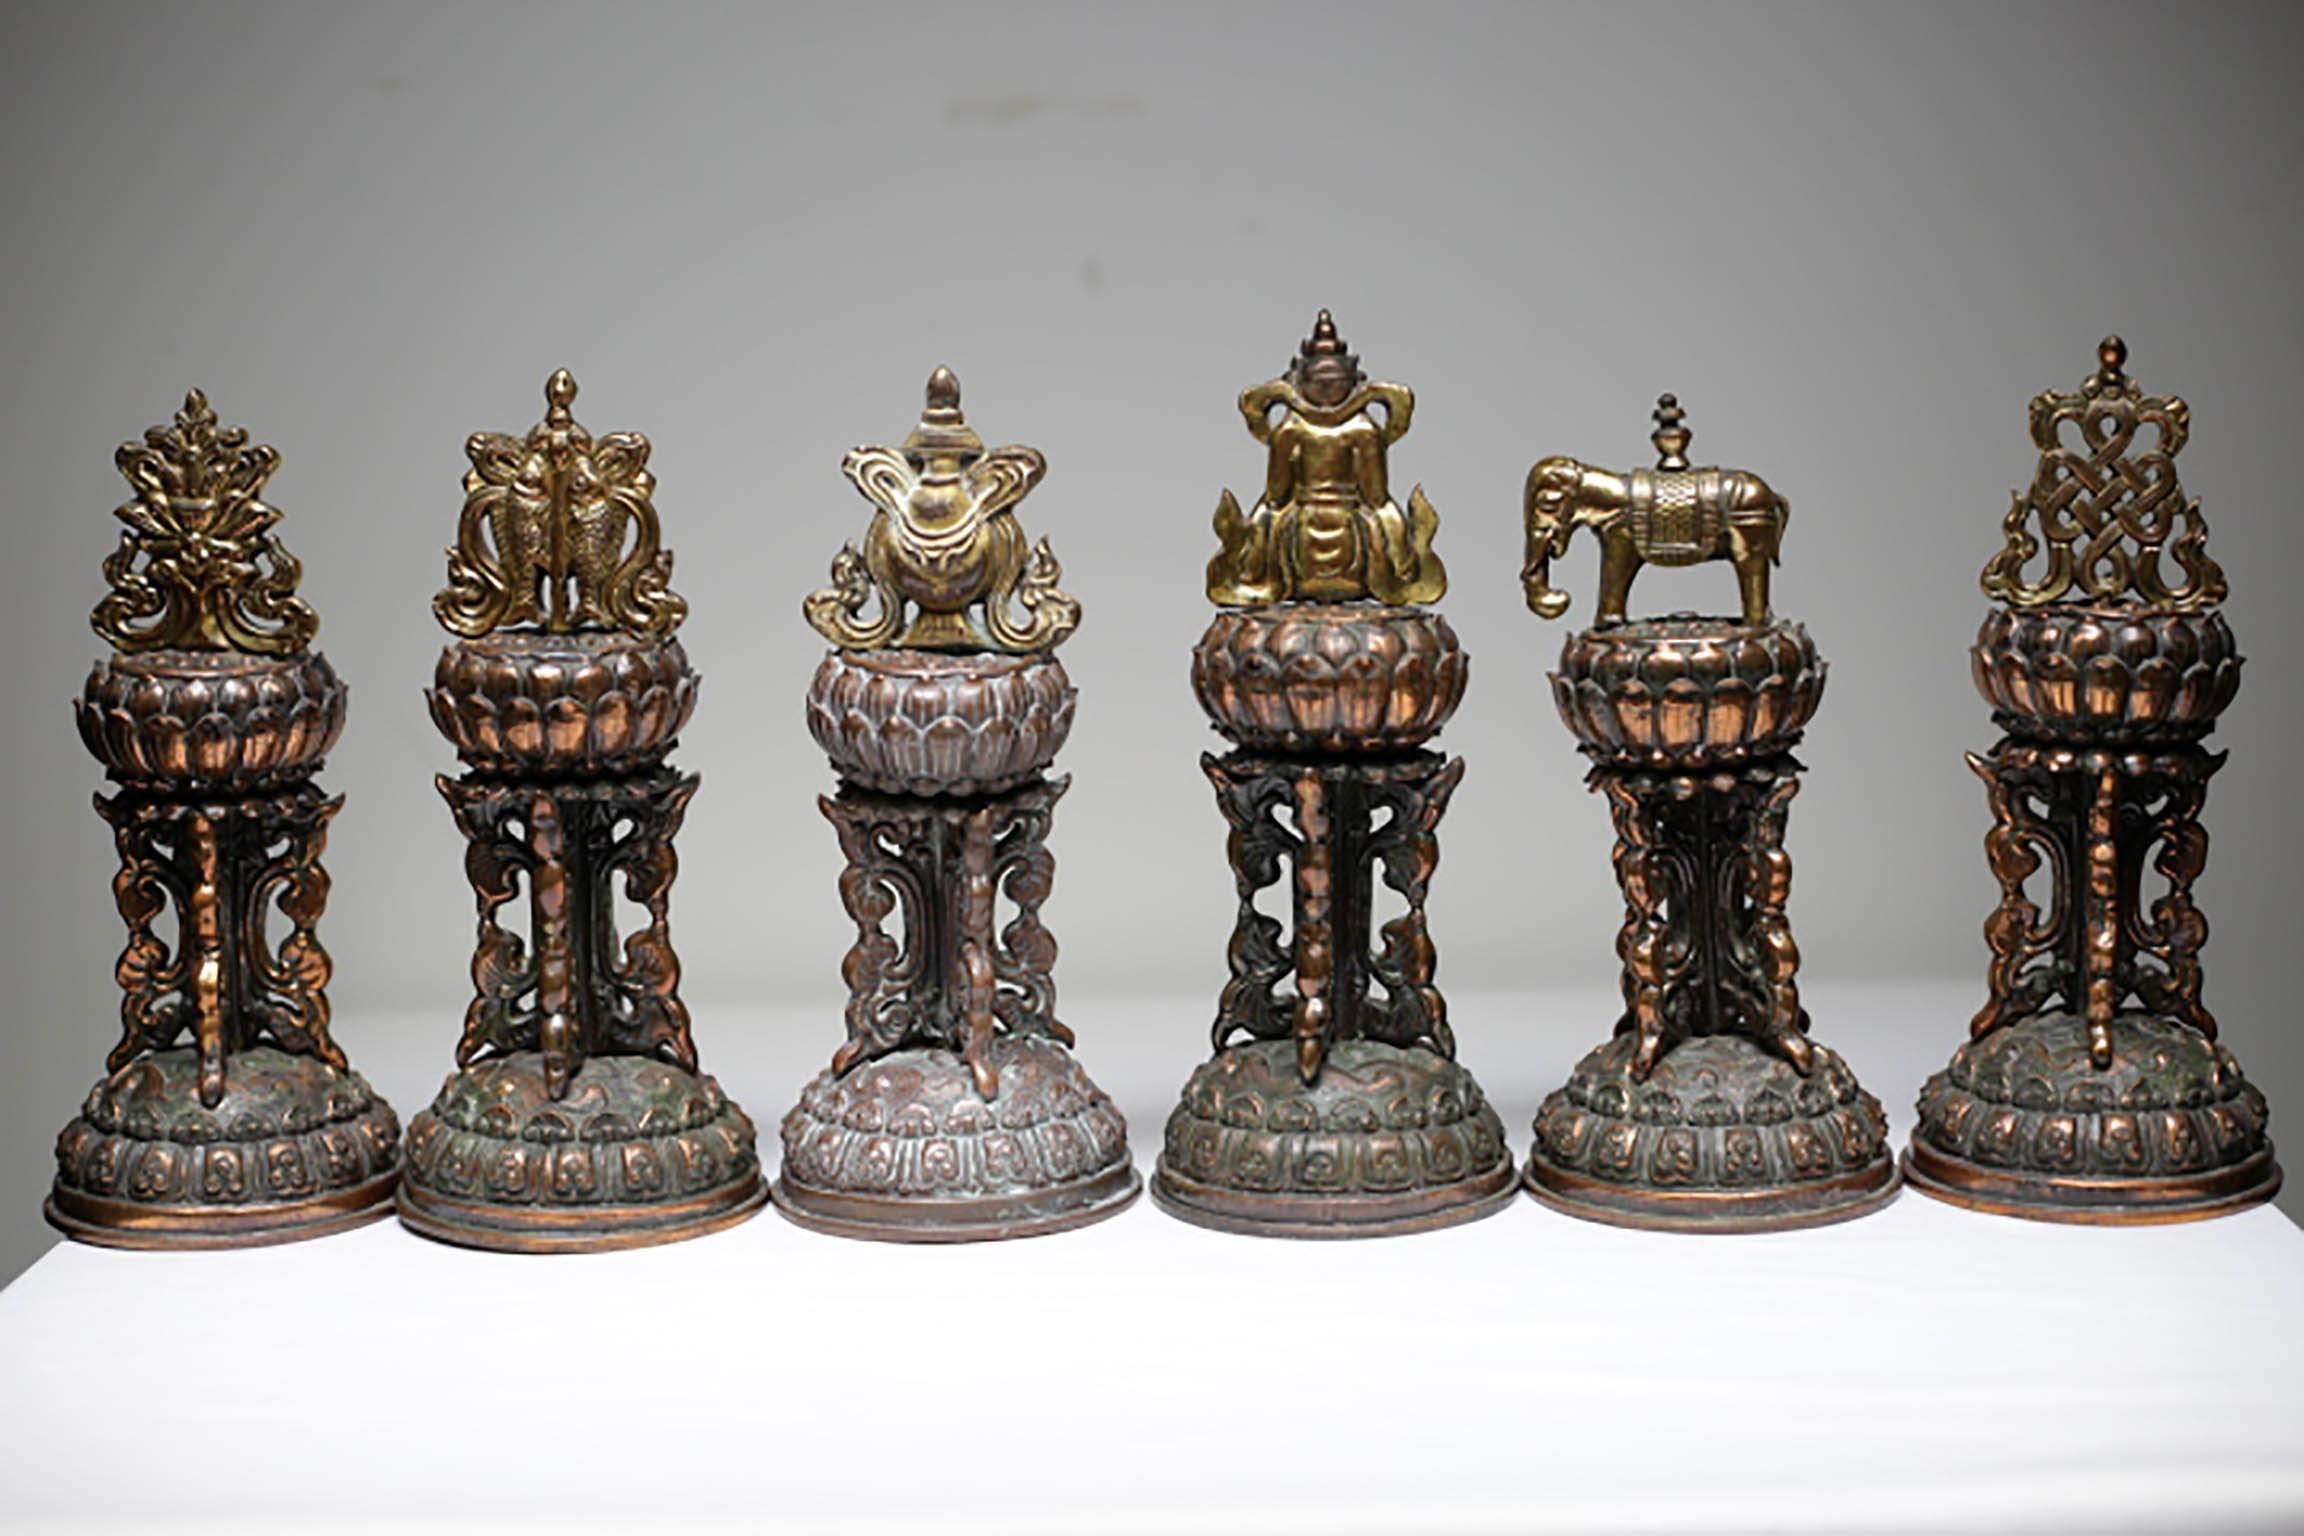 Balinese Early 20th Century Bronze Plated Temple Bells, circa 1920-1940